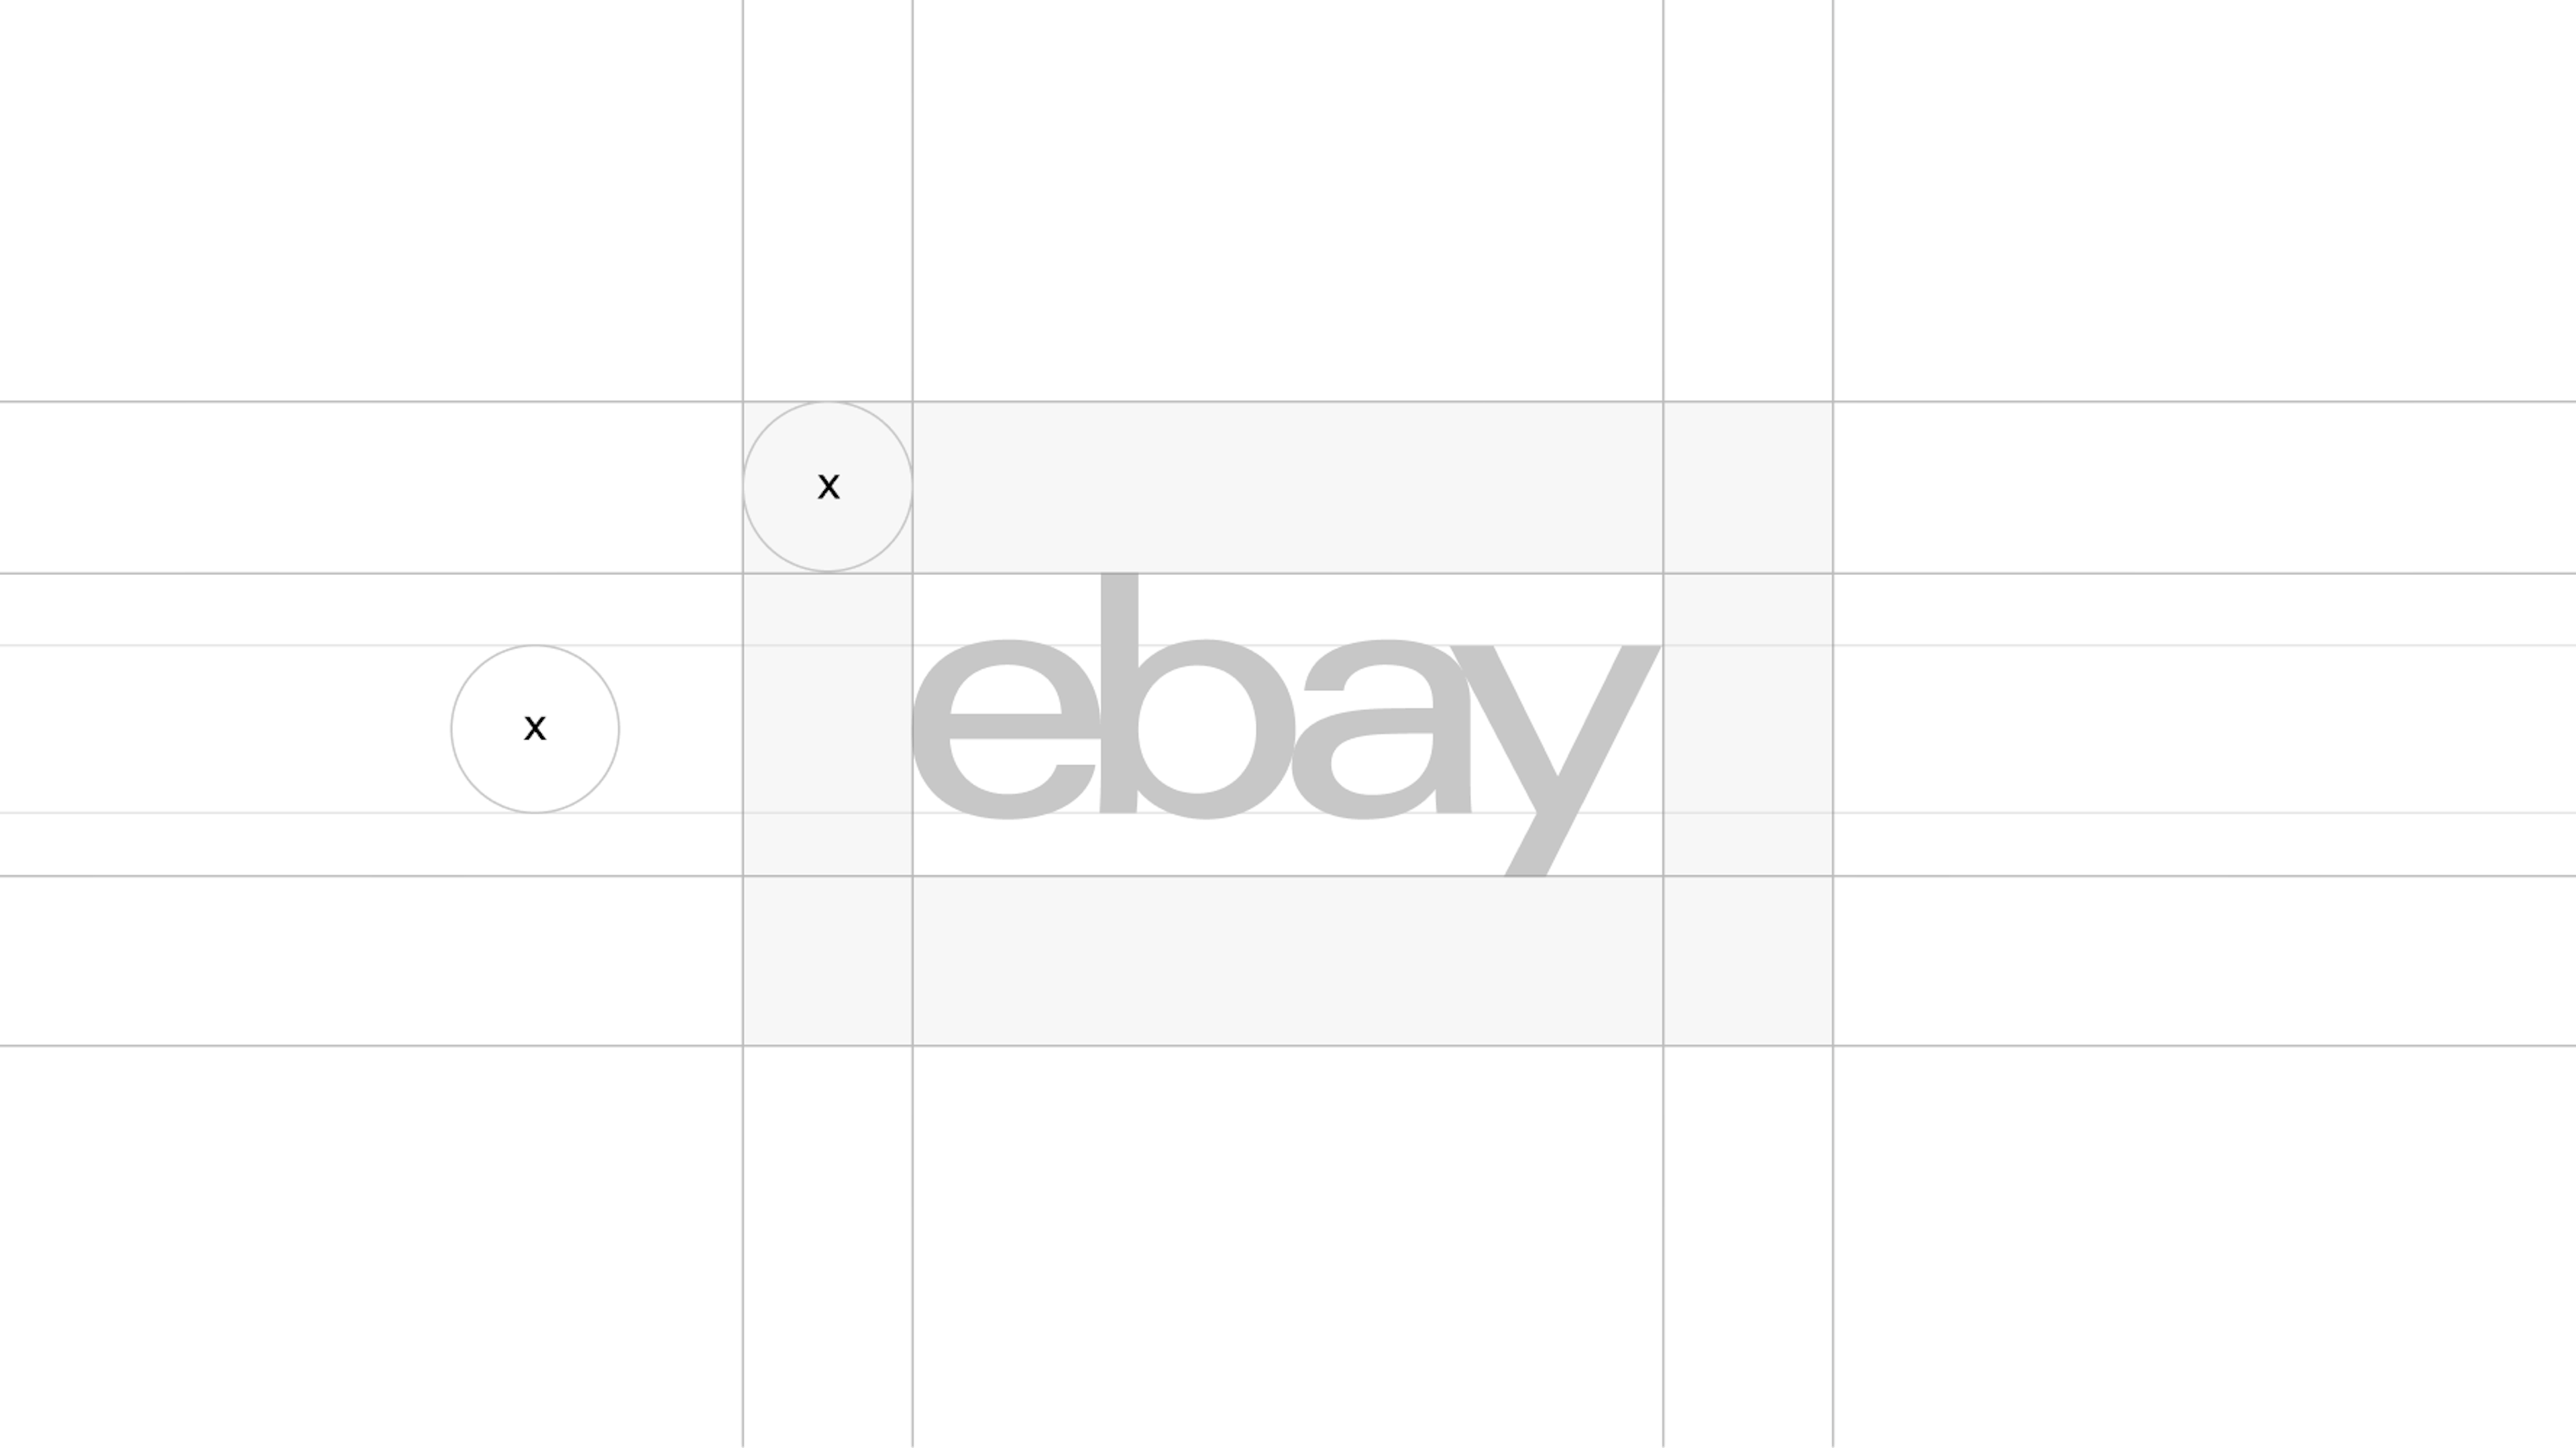 The eBay logo with grid lines indicating that “x” is the clear space that surrounds the logo.